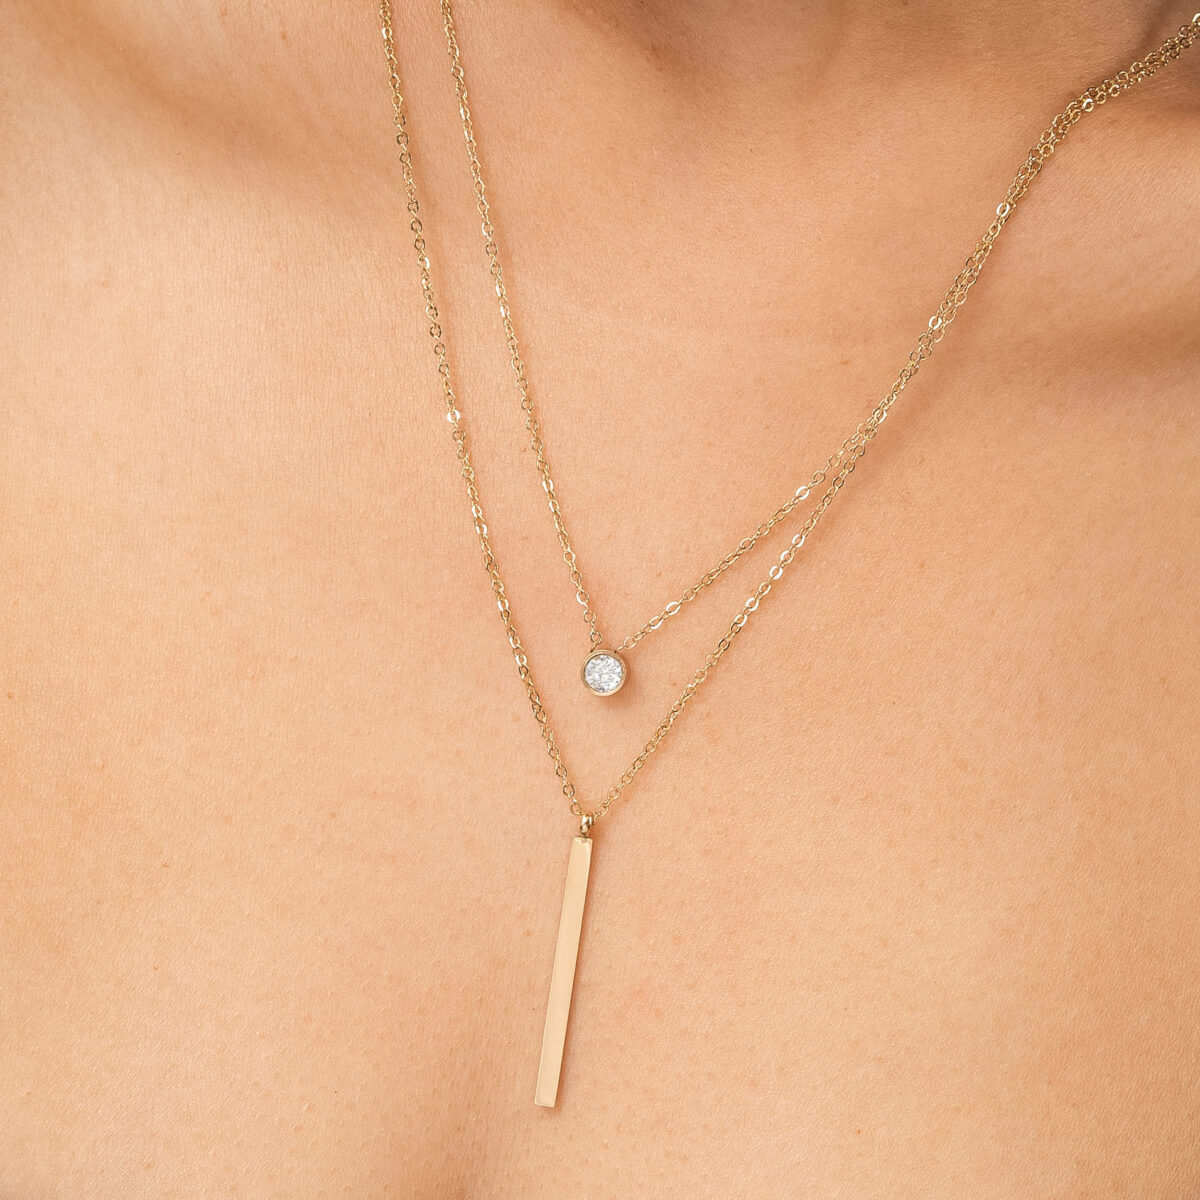 https://m.clubbella.co/product/solitaire-bar-necklace-2/ SOLITAIRE BAR NECKLACE (1)